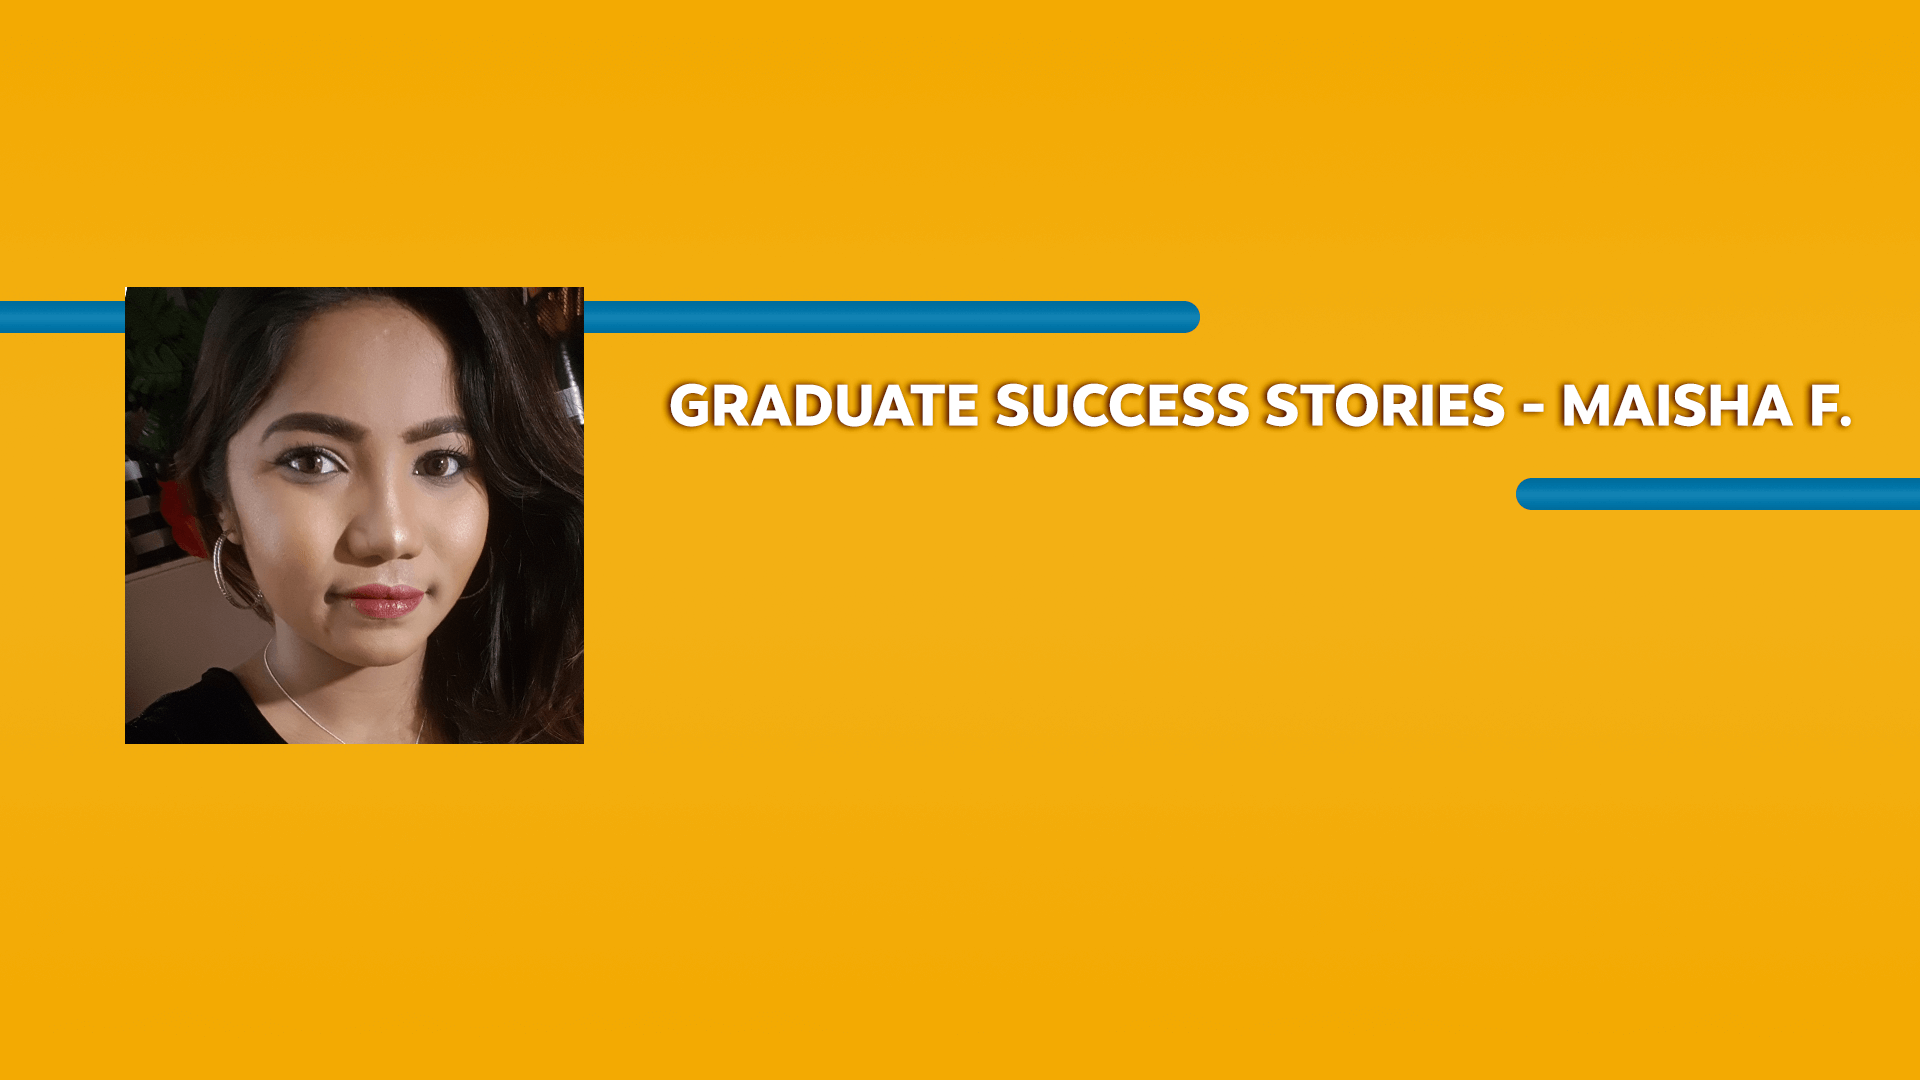 Orange rectangle with a picture of a woman and Graduate Success Stories - Maisha F. text in white font